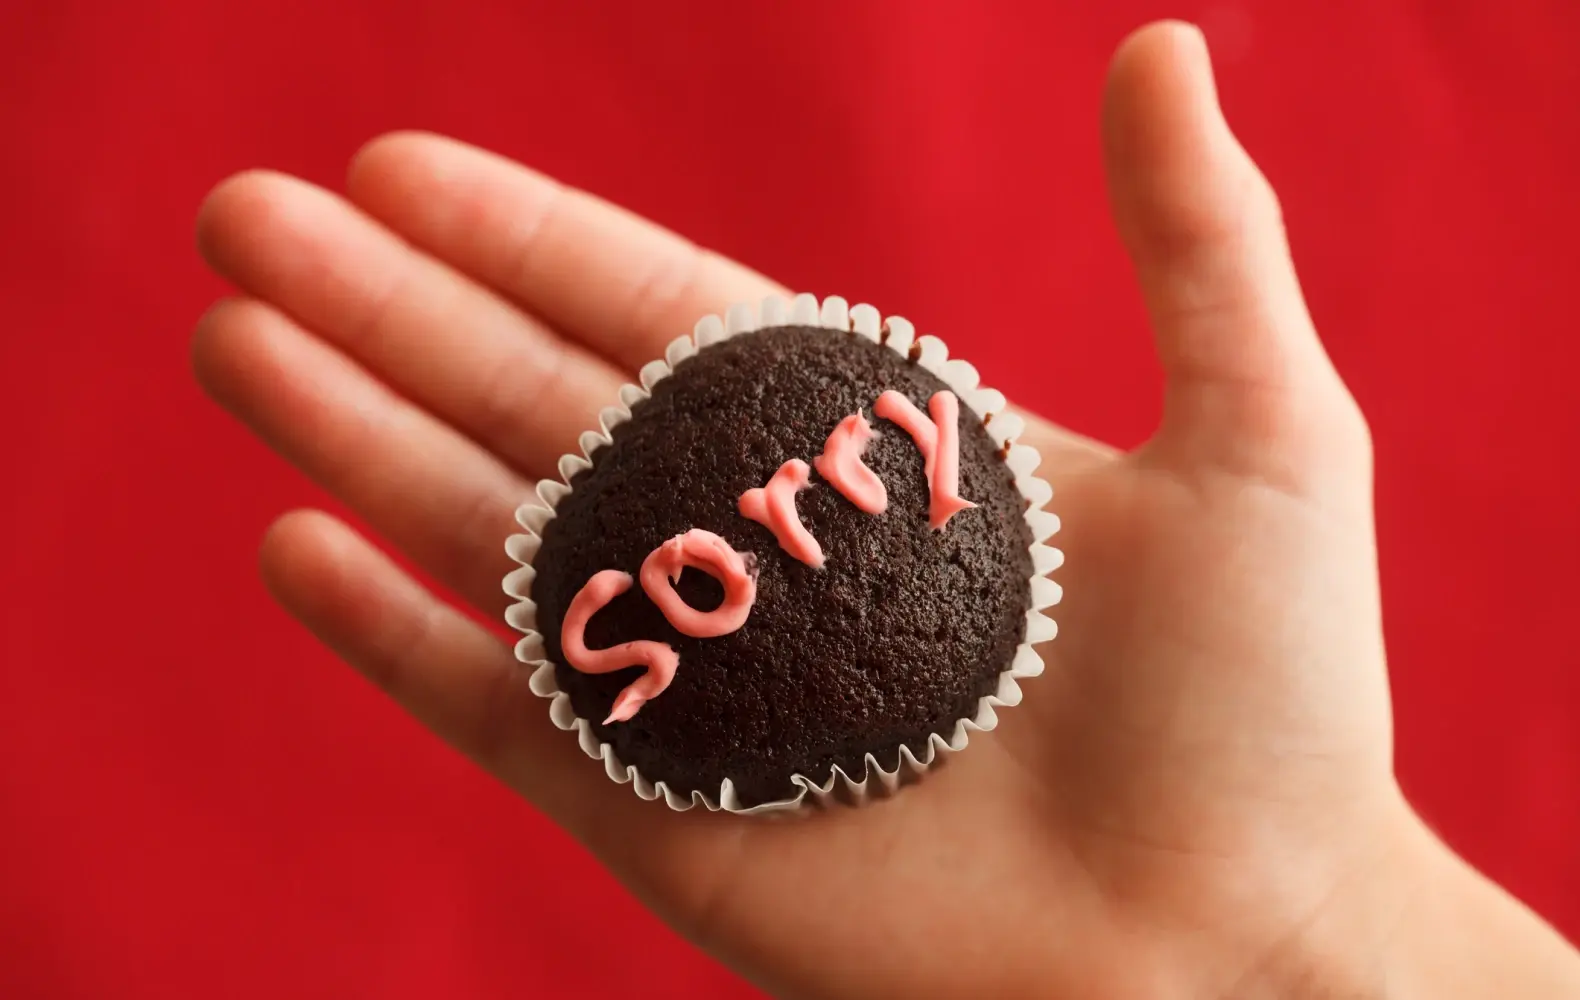 The word "Sorry" written on a cupcake being offered as an apology.